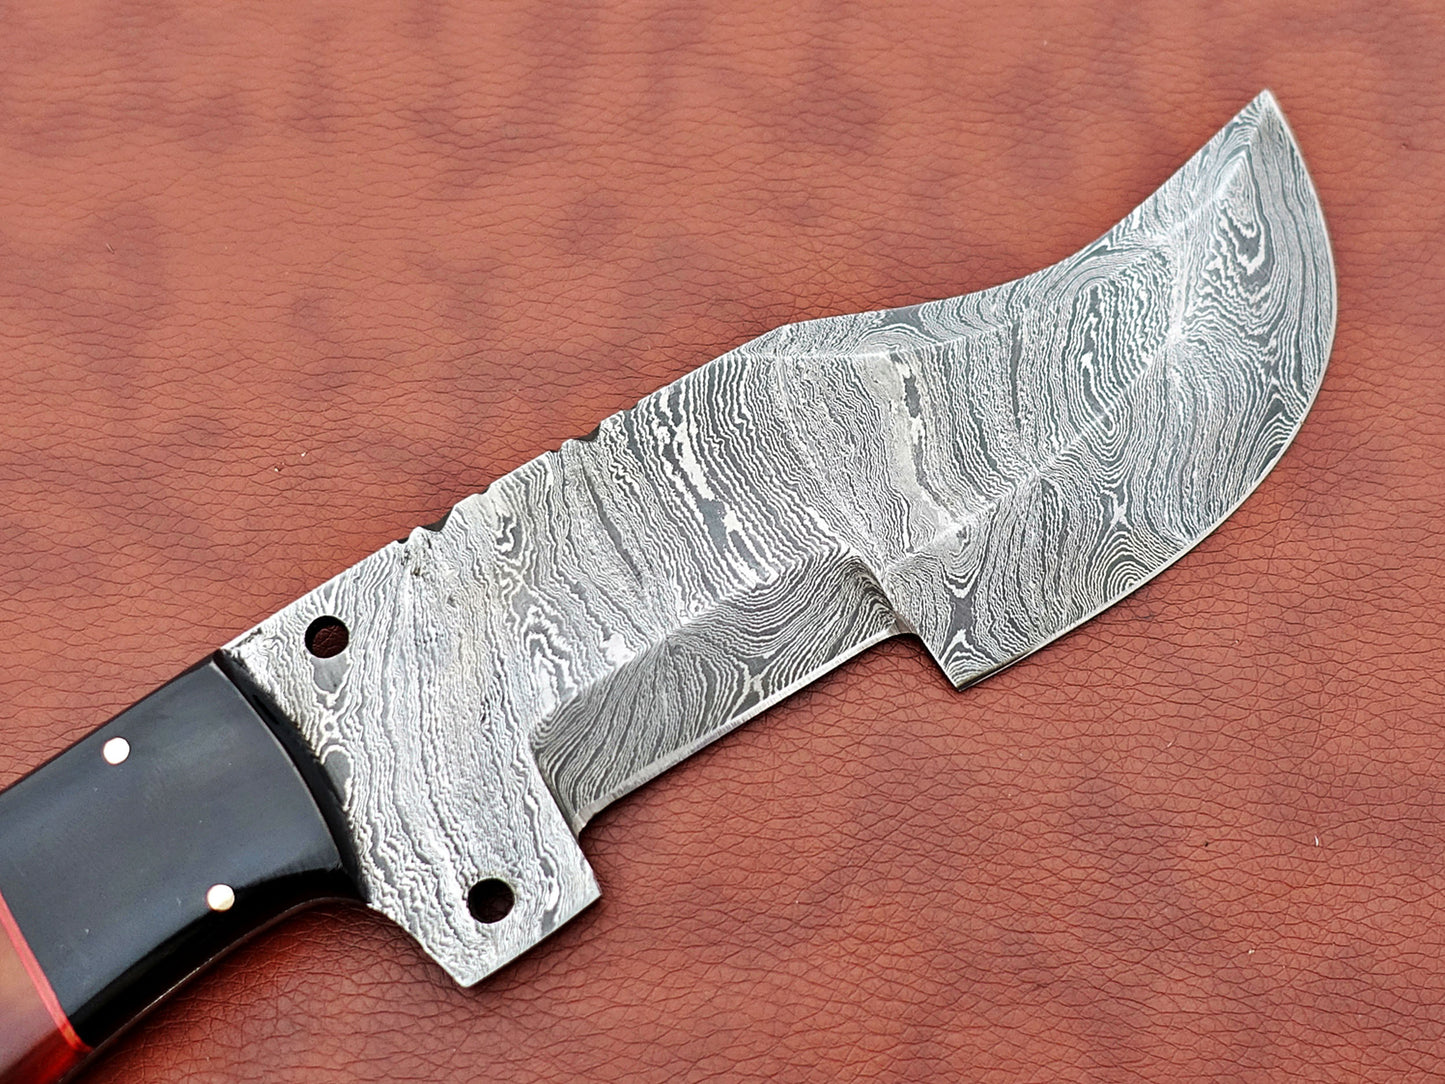 12" Long hand forged twist pattern full tang Damascus steel tracker knife, Ram & Bull horn scale, Cow leather sheath